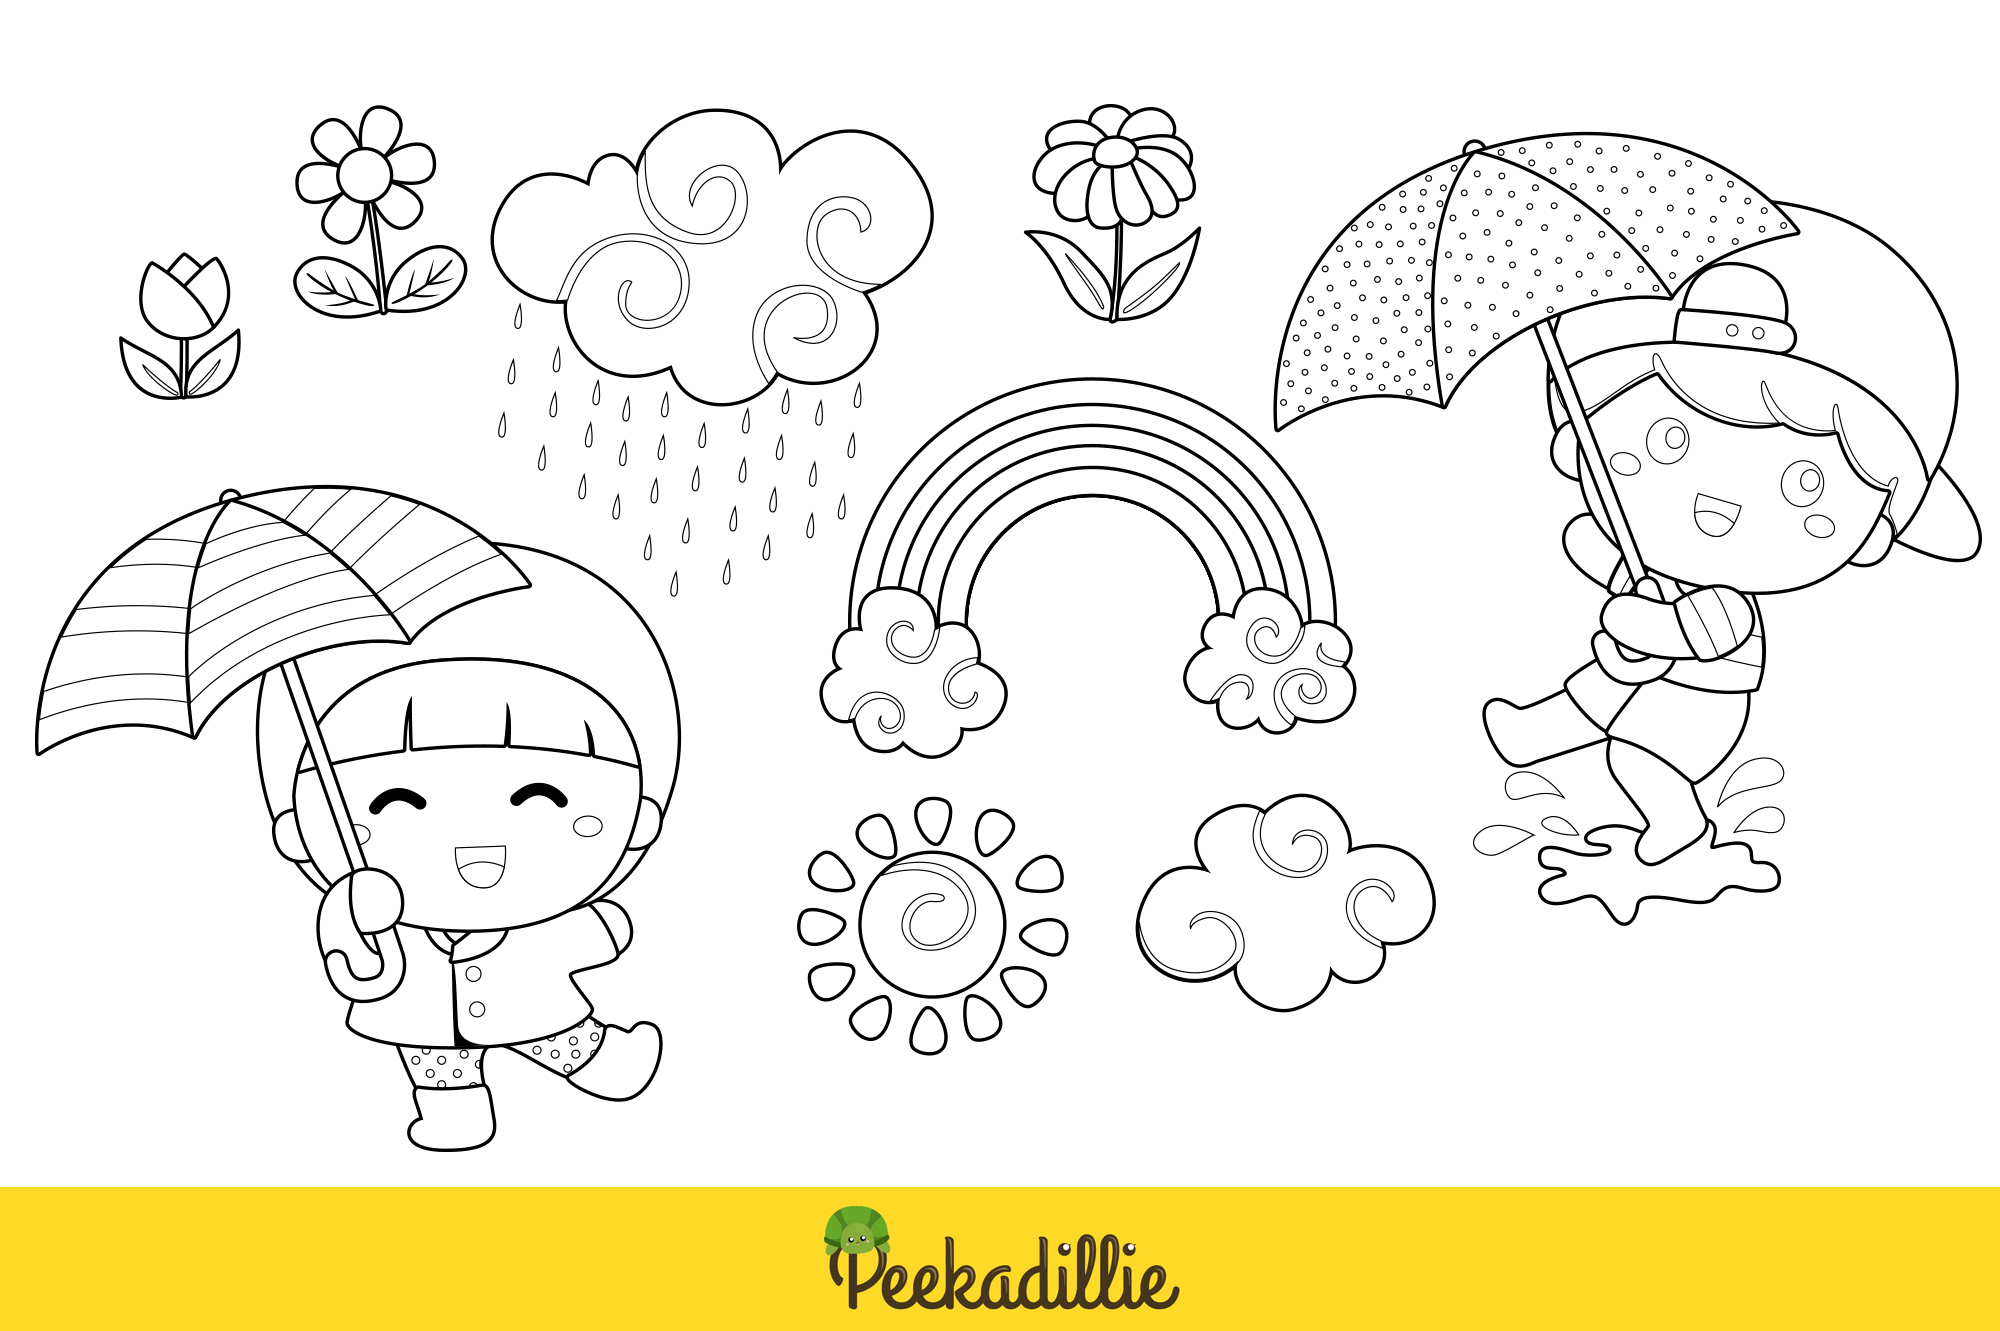 Coloring page with a girl holding an umbrella.